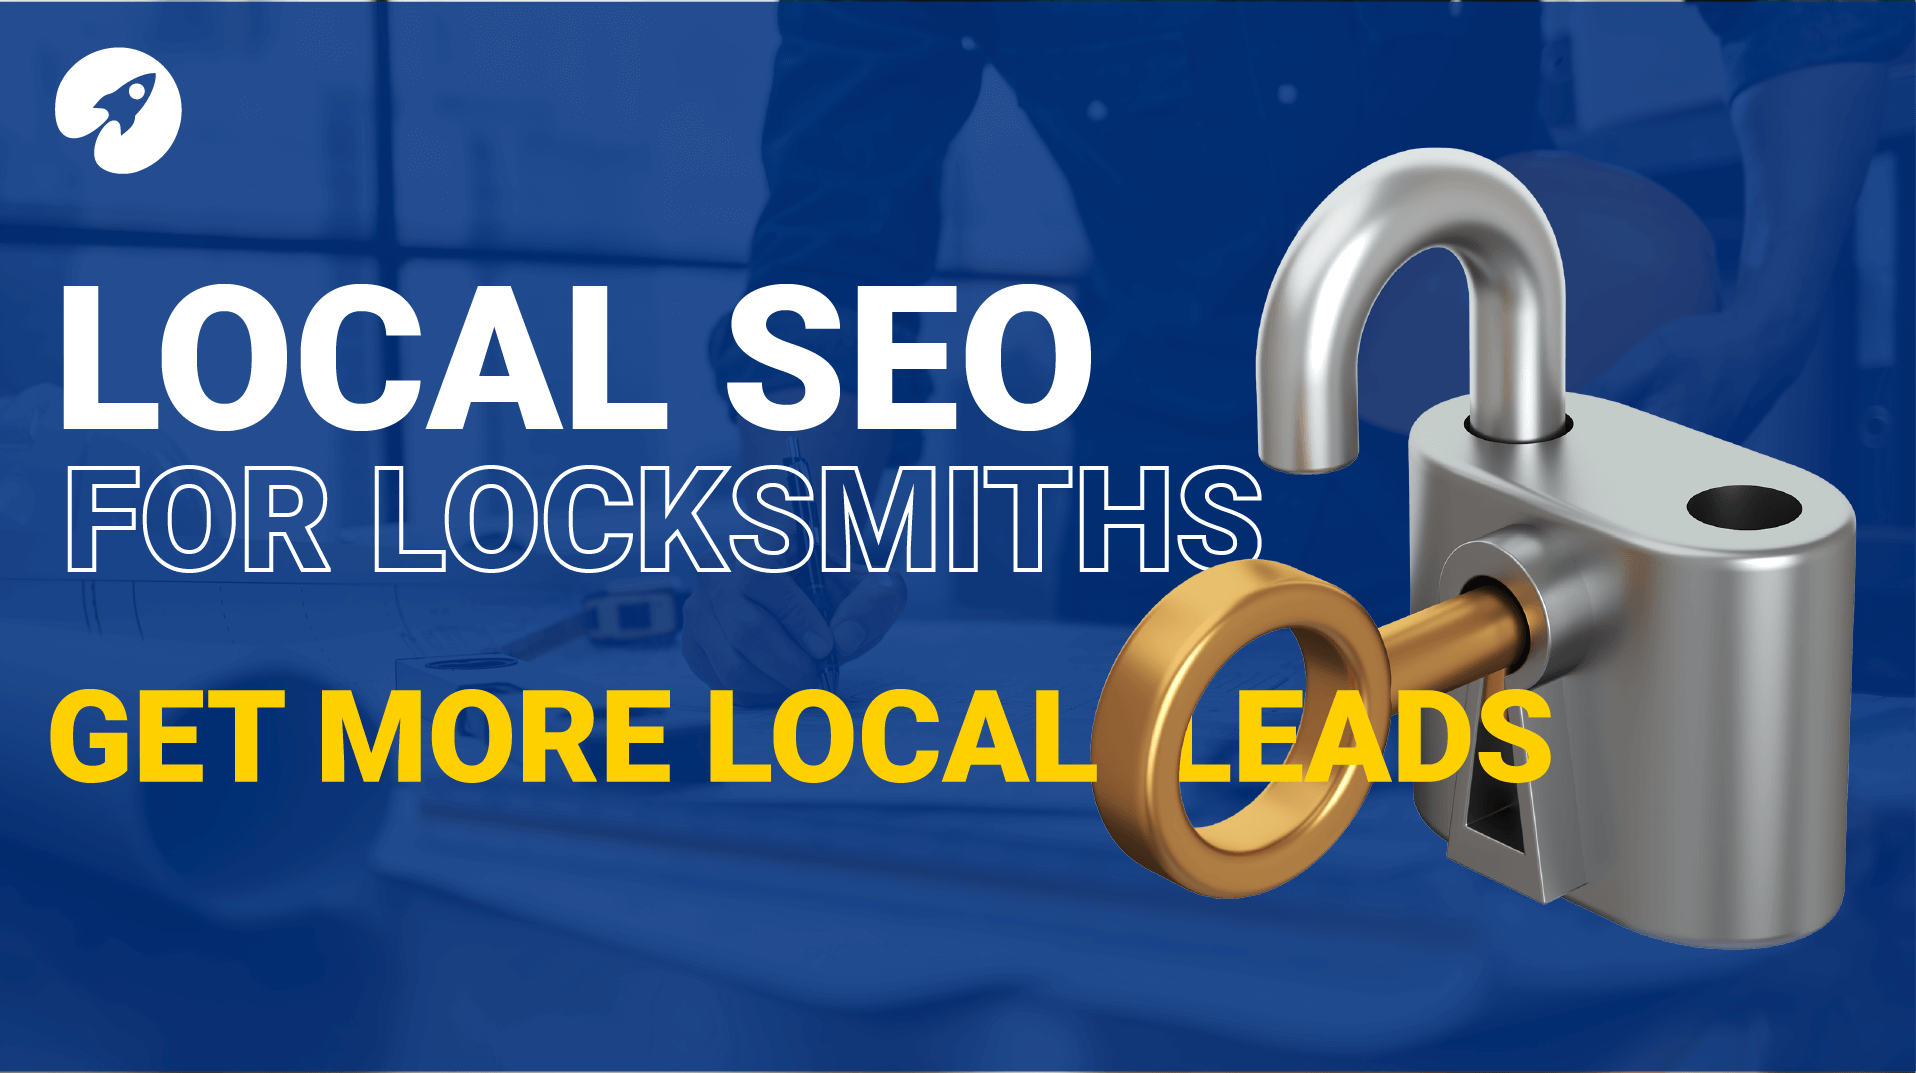 SEO for locksmiths – The ultimate guide